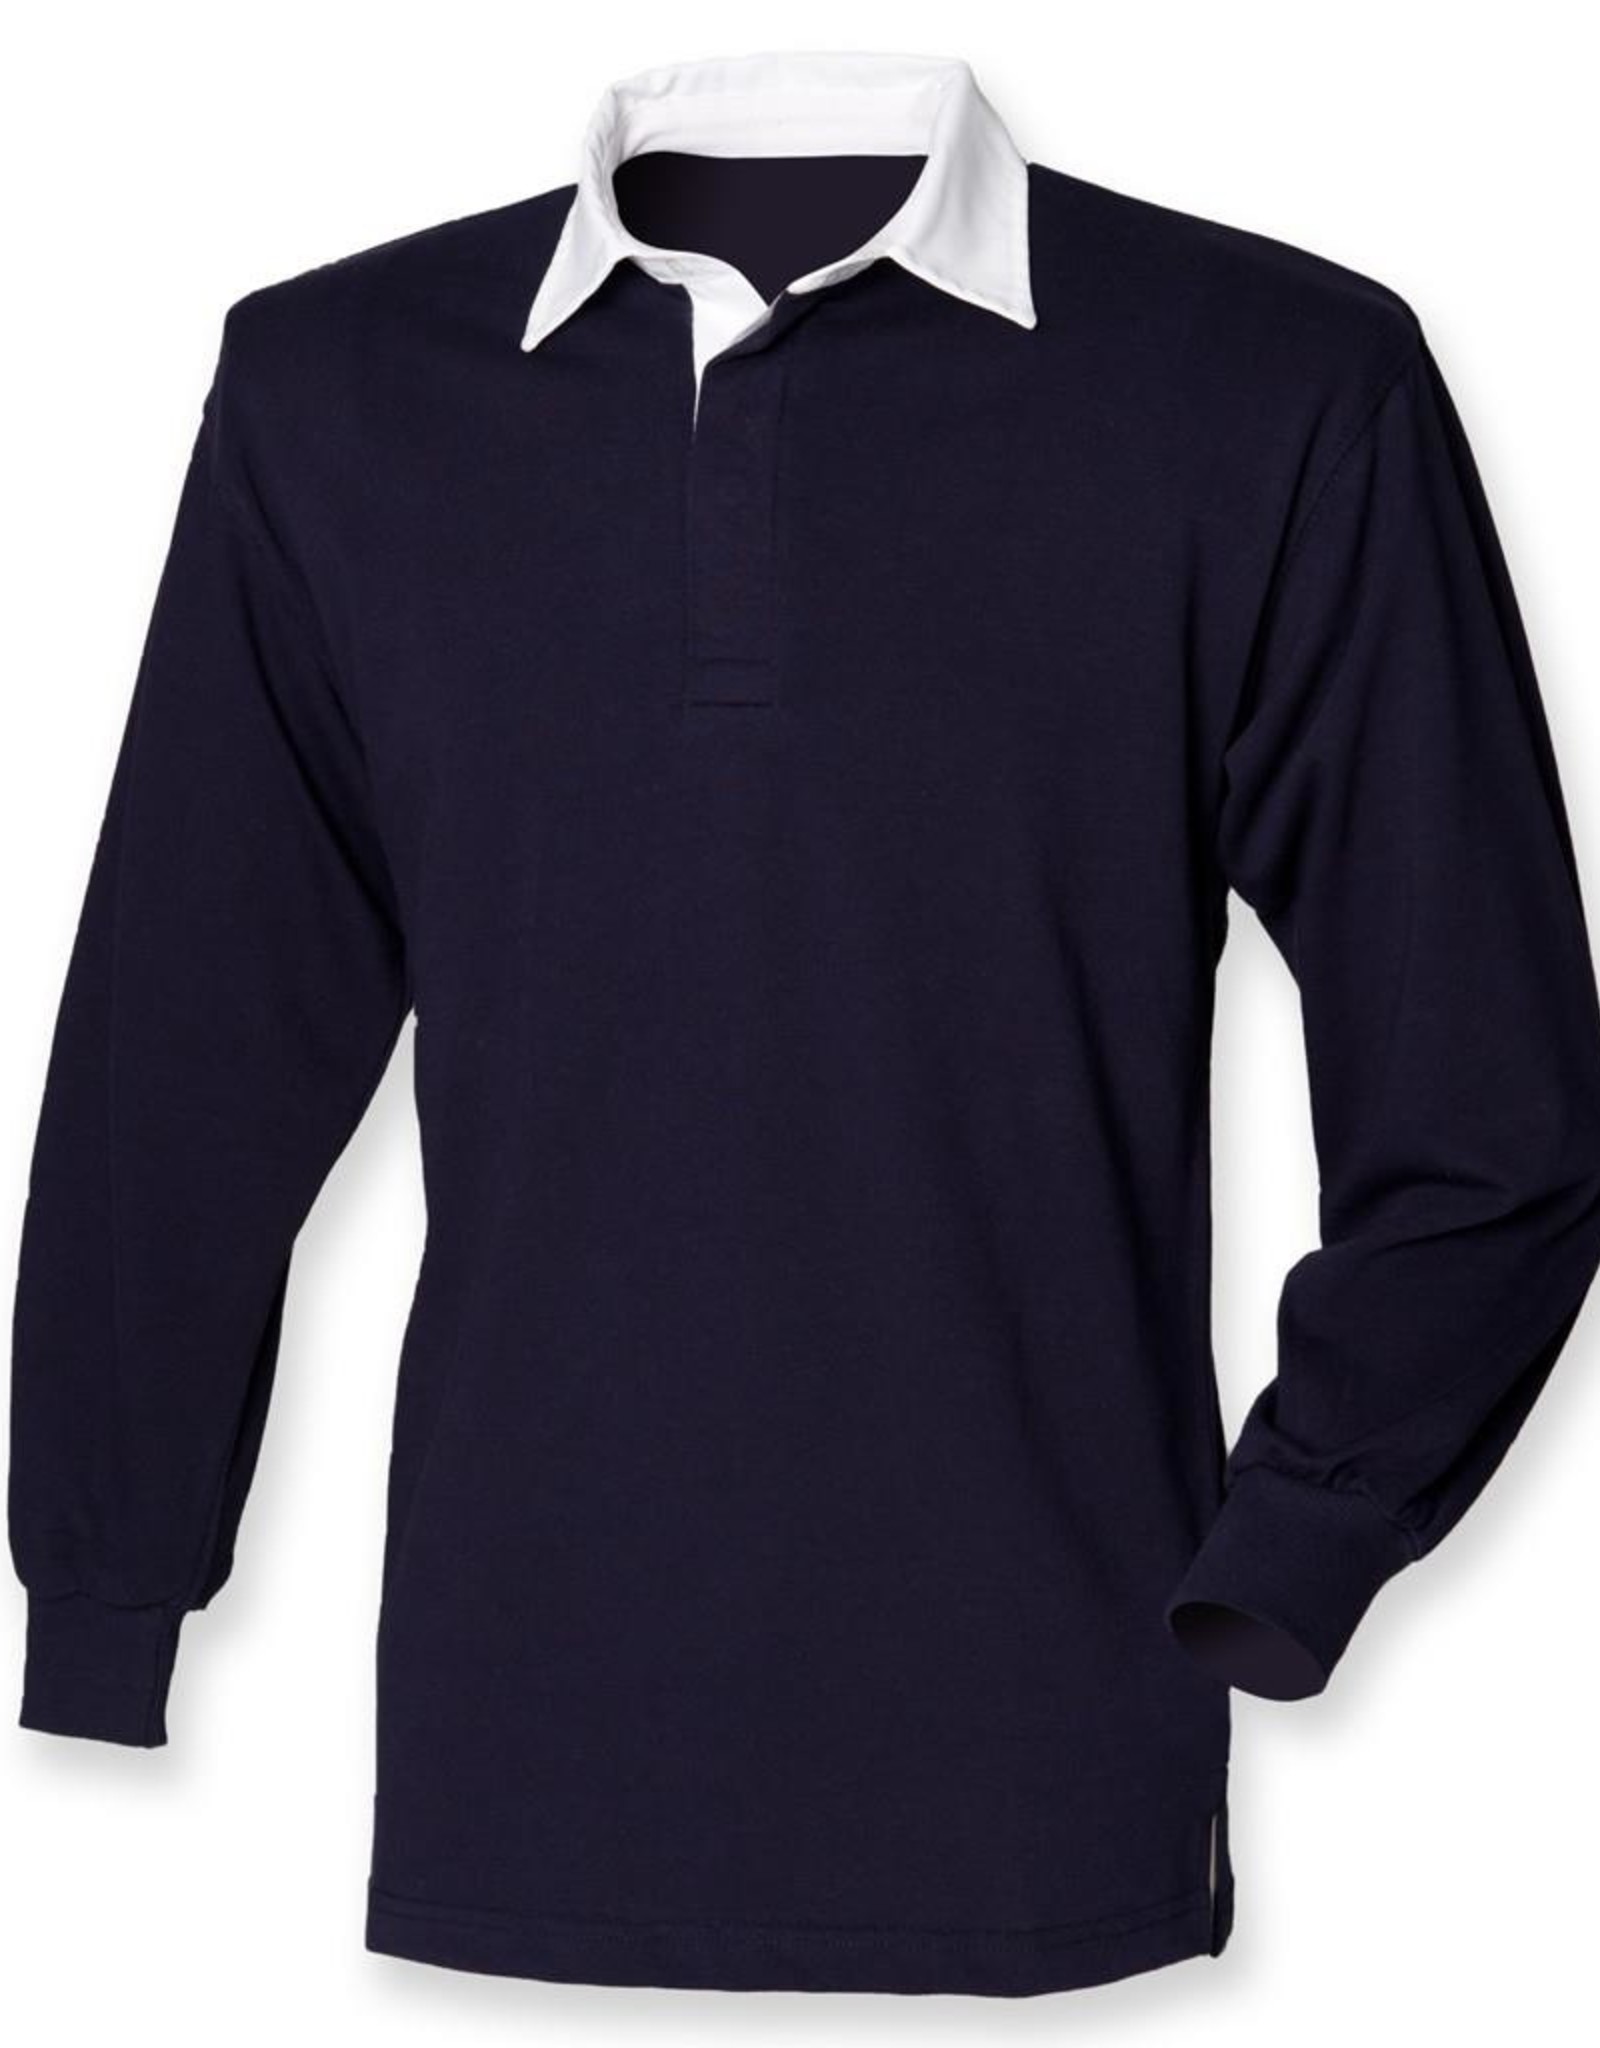 RUGBY / POLOSWEATER heren - navy / wit